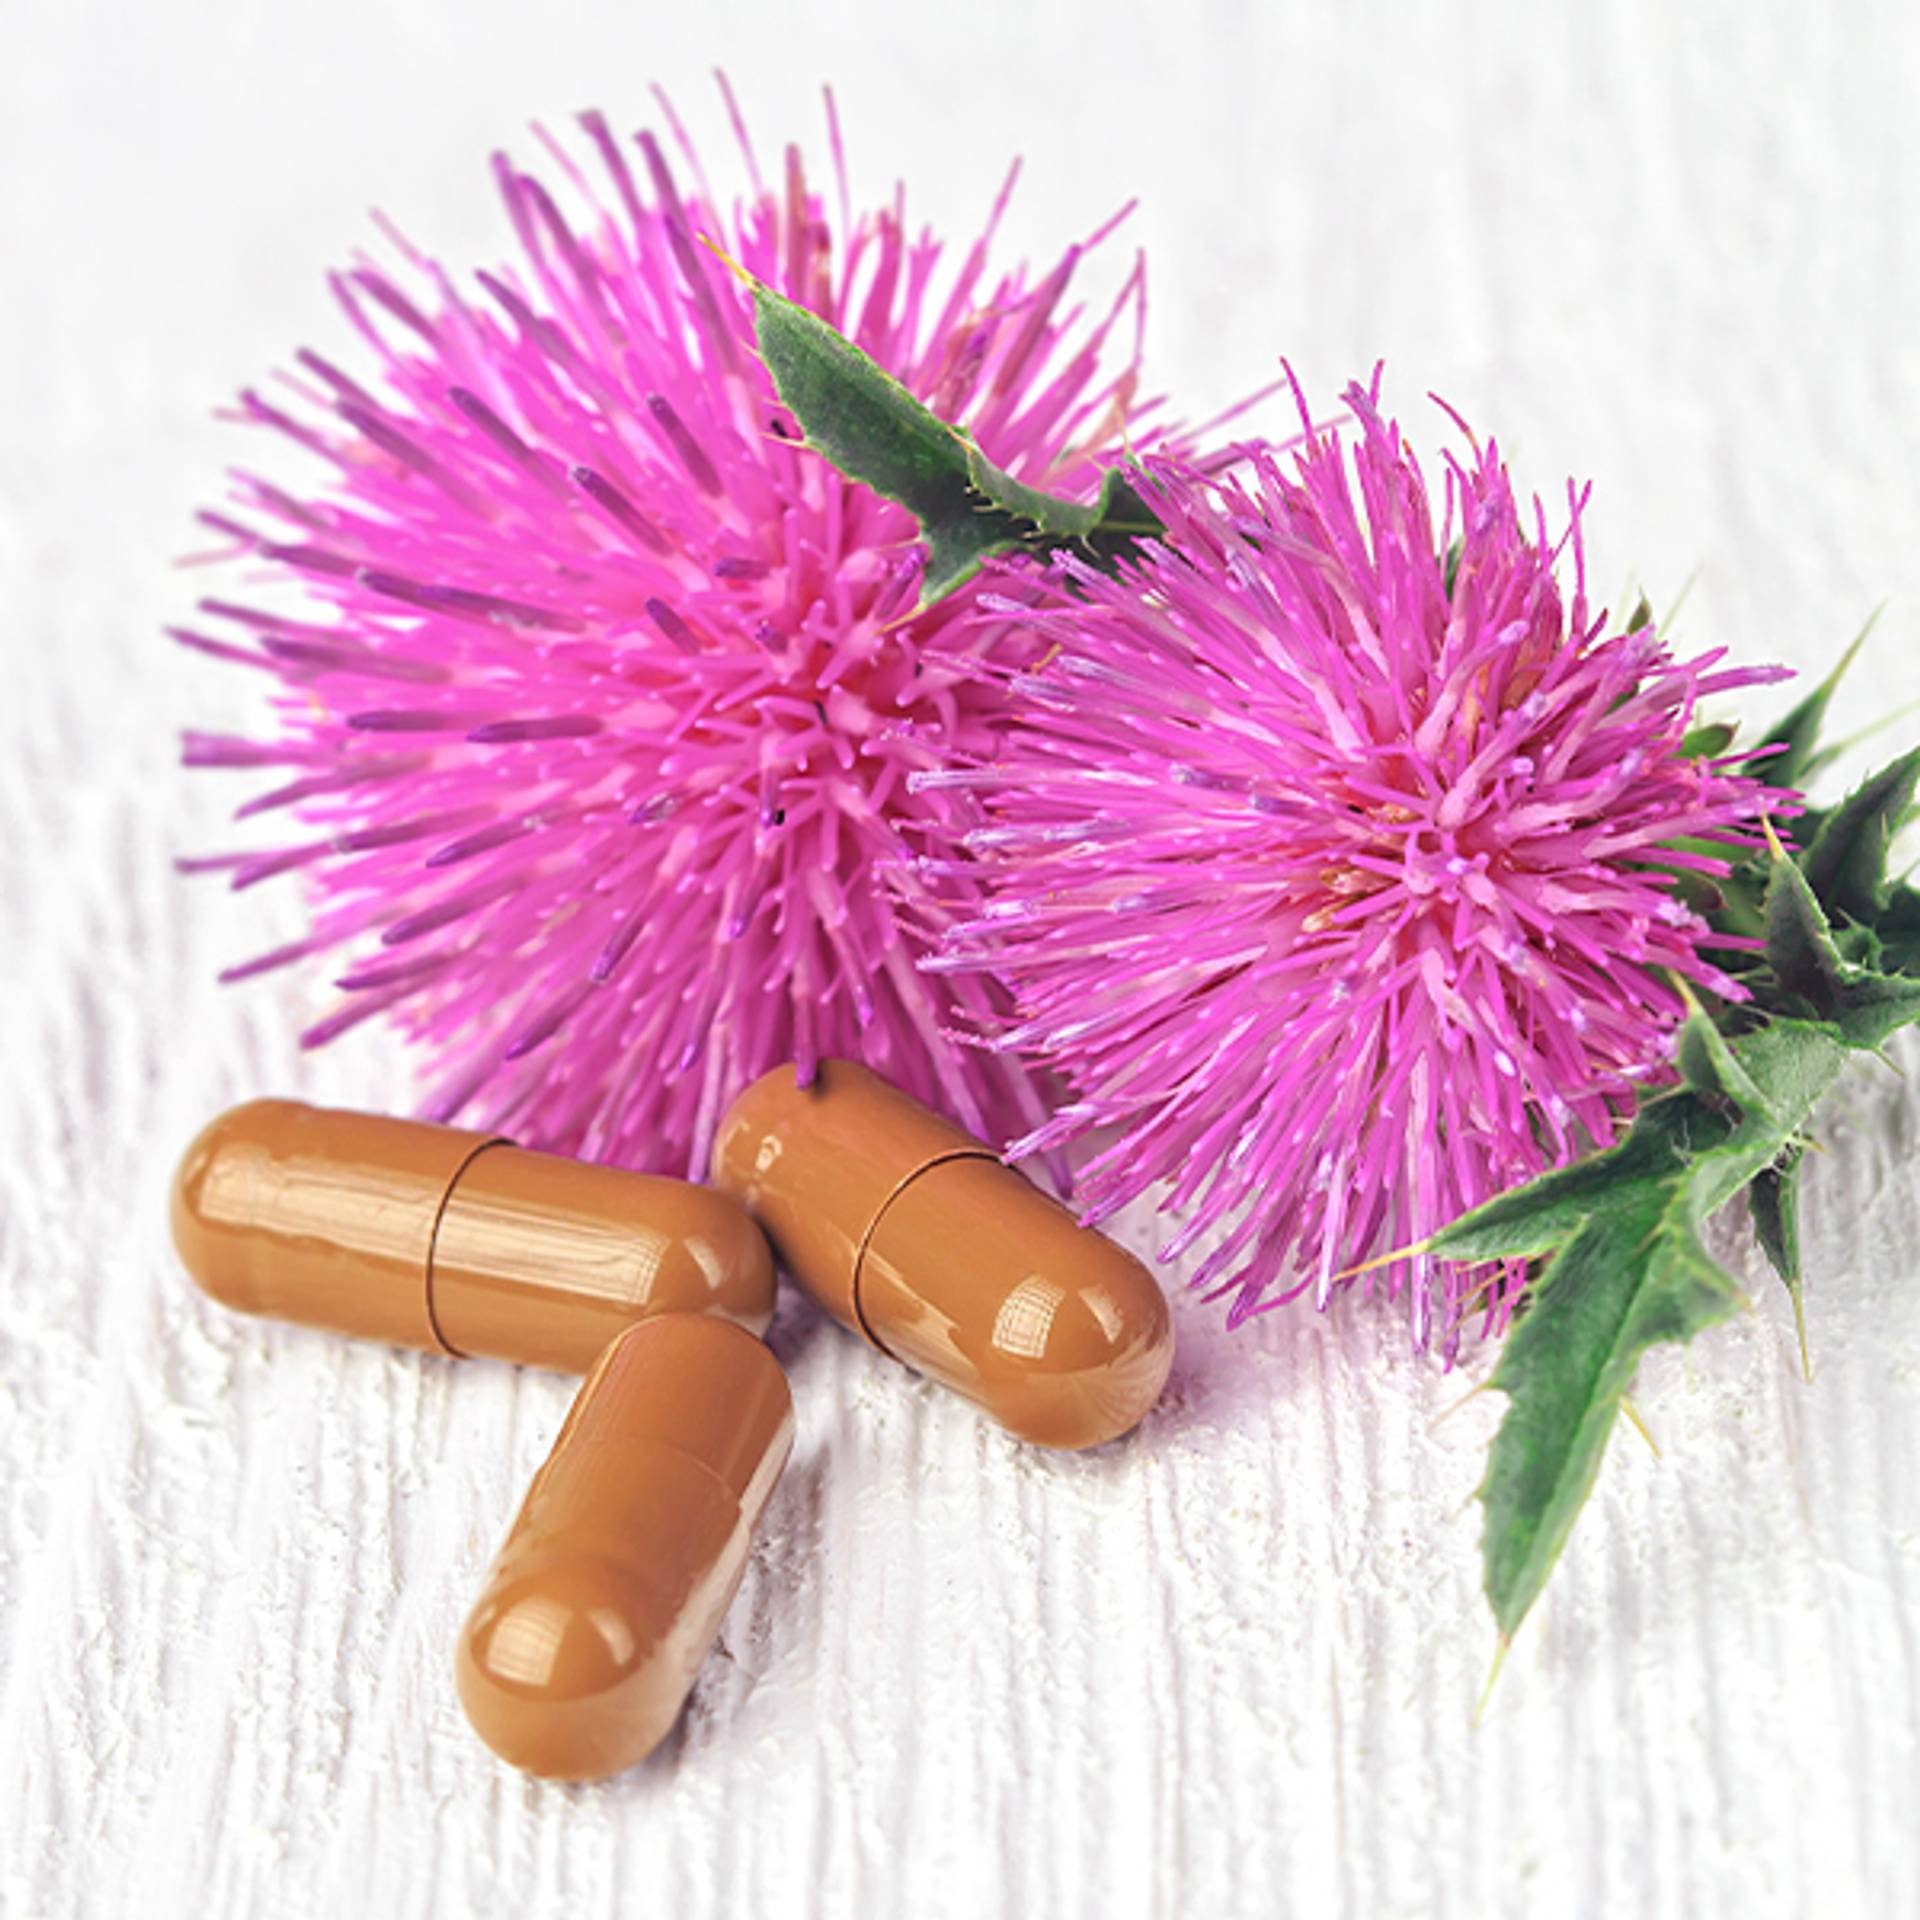 Buying milk thistle - What you should know!